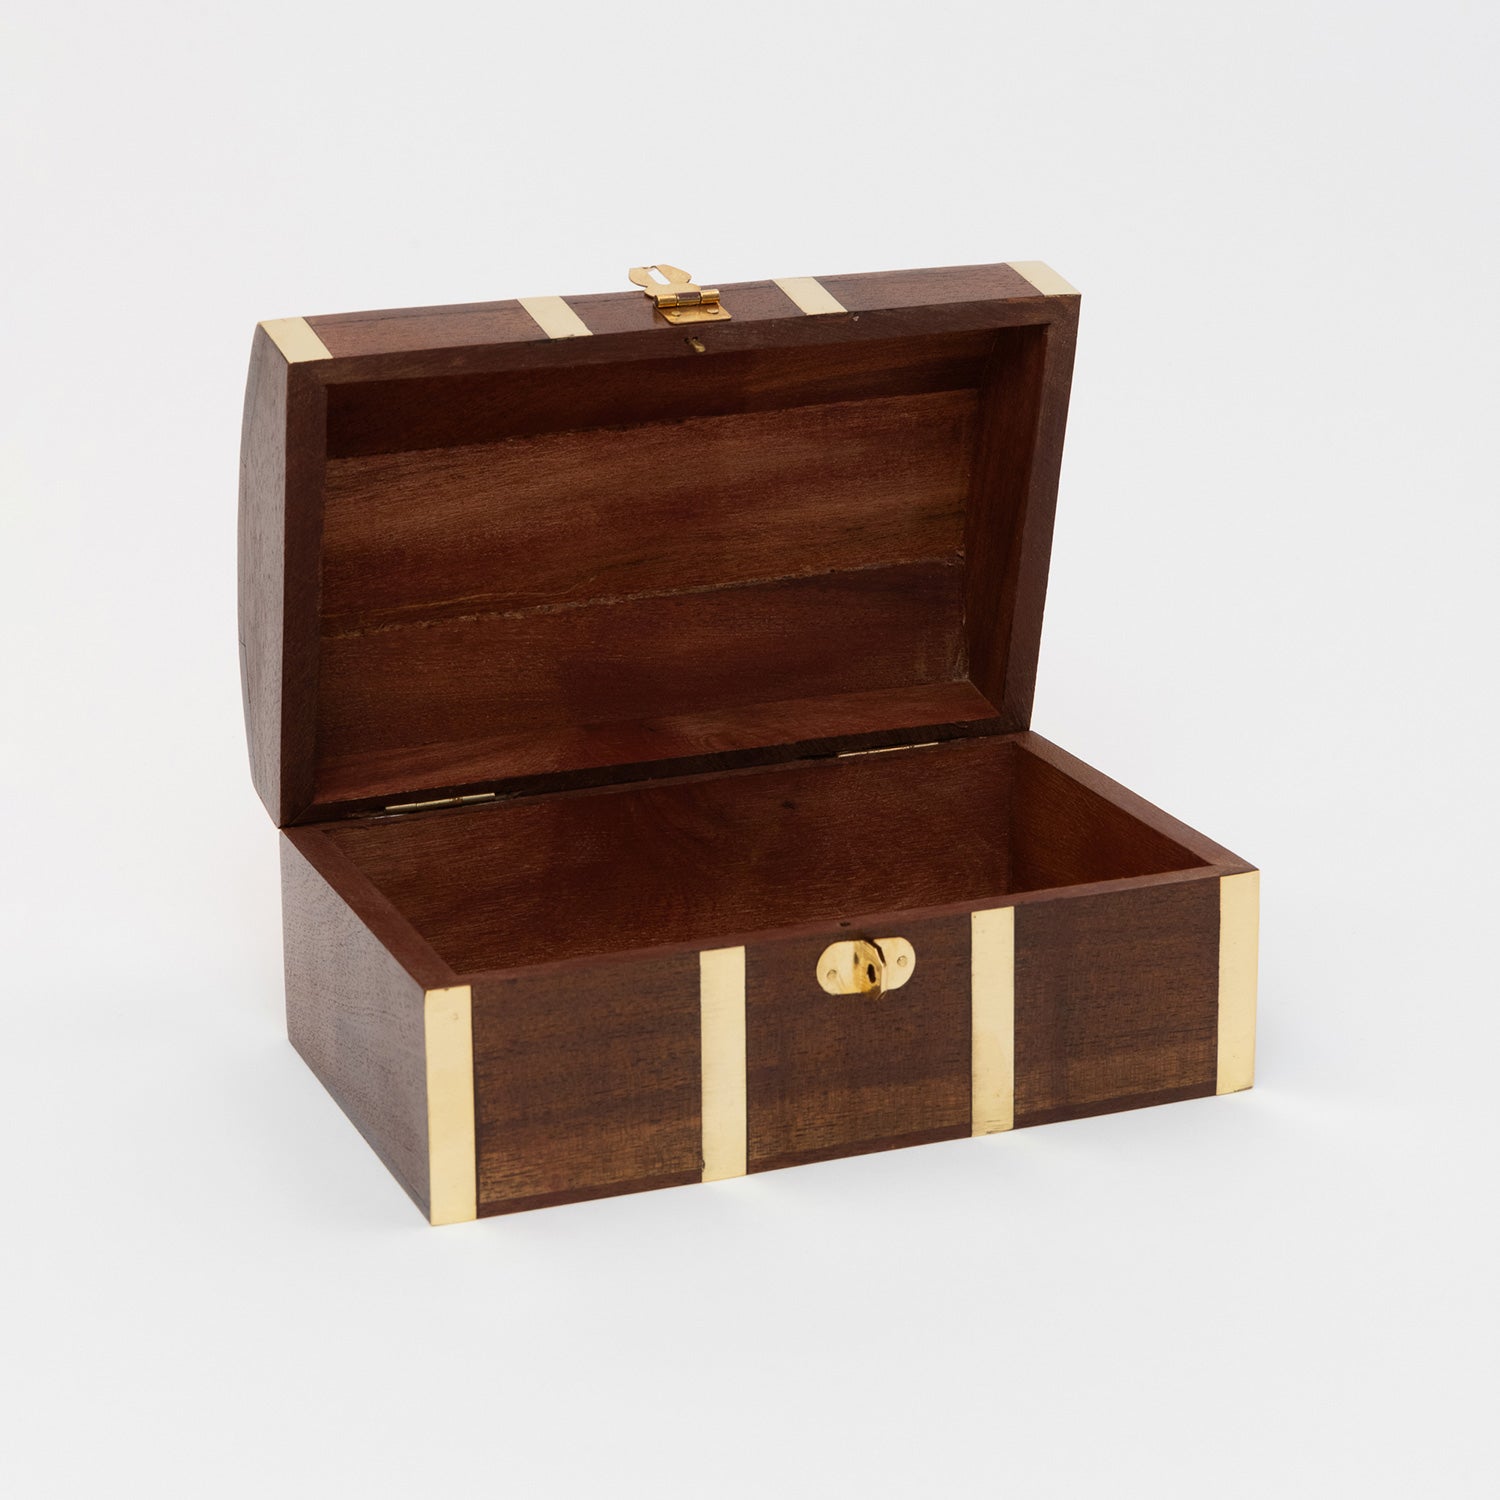 A wooden storage treasure chest adorned with a centrepiece anchor motif. Pictured on a white background. 